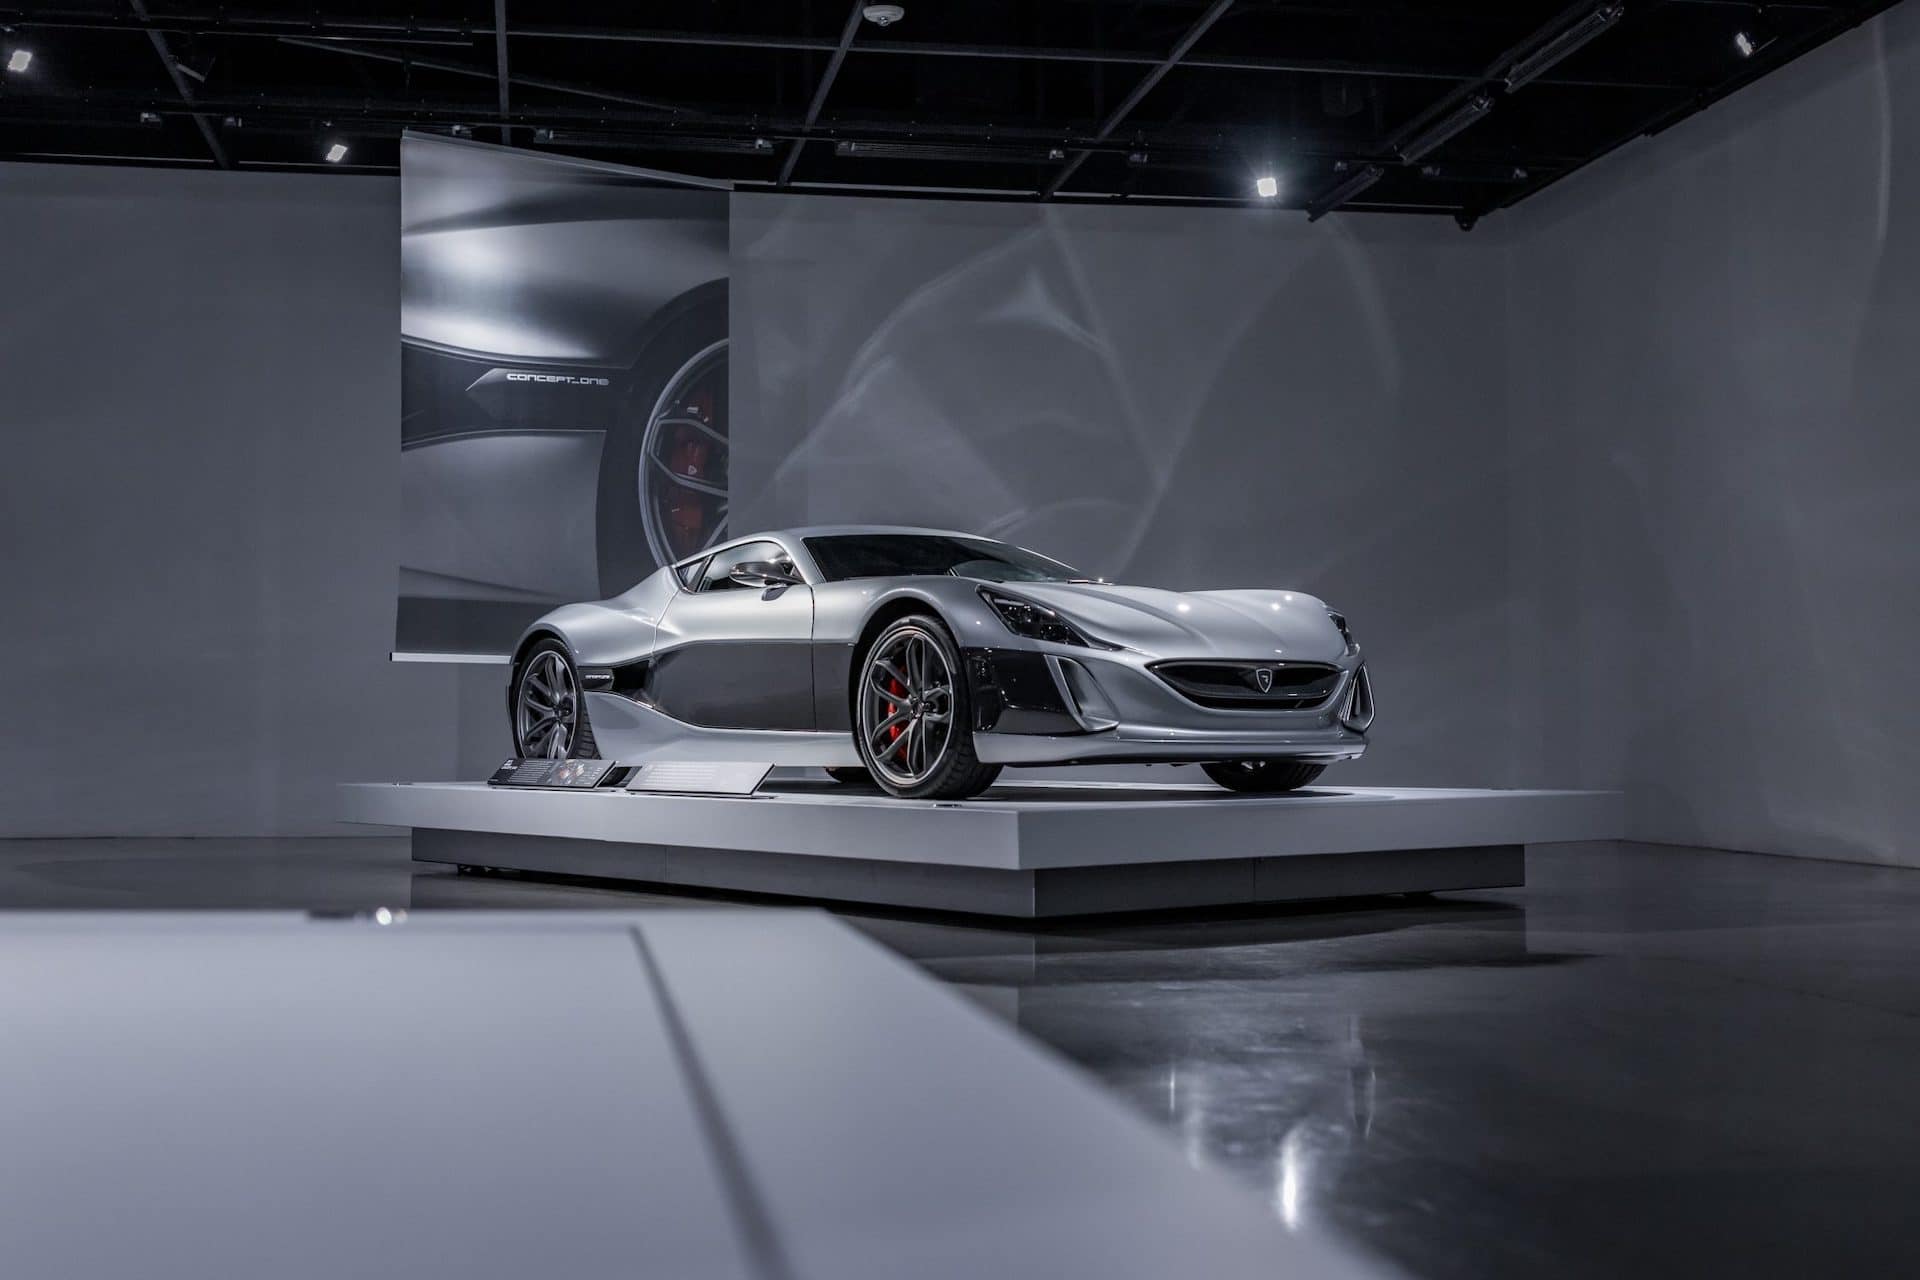 Rimac Concept_One Takes Centre Stage at New Hypercar Exhibit